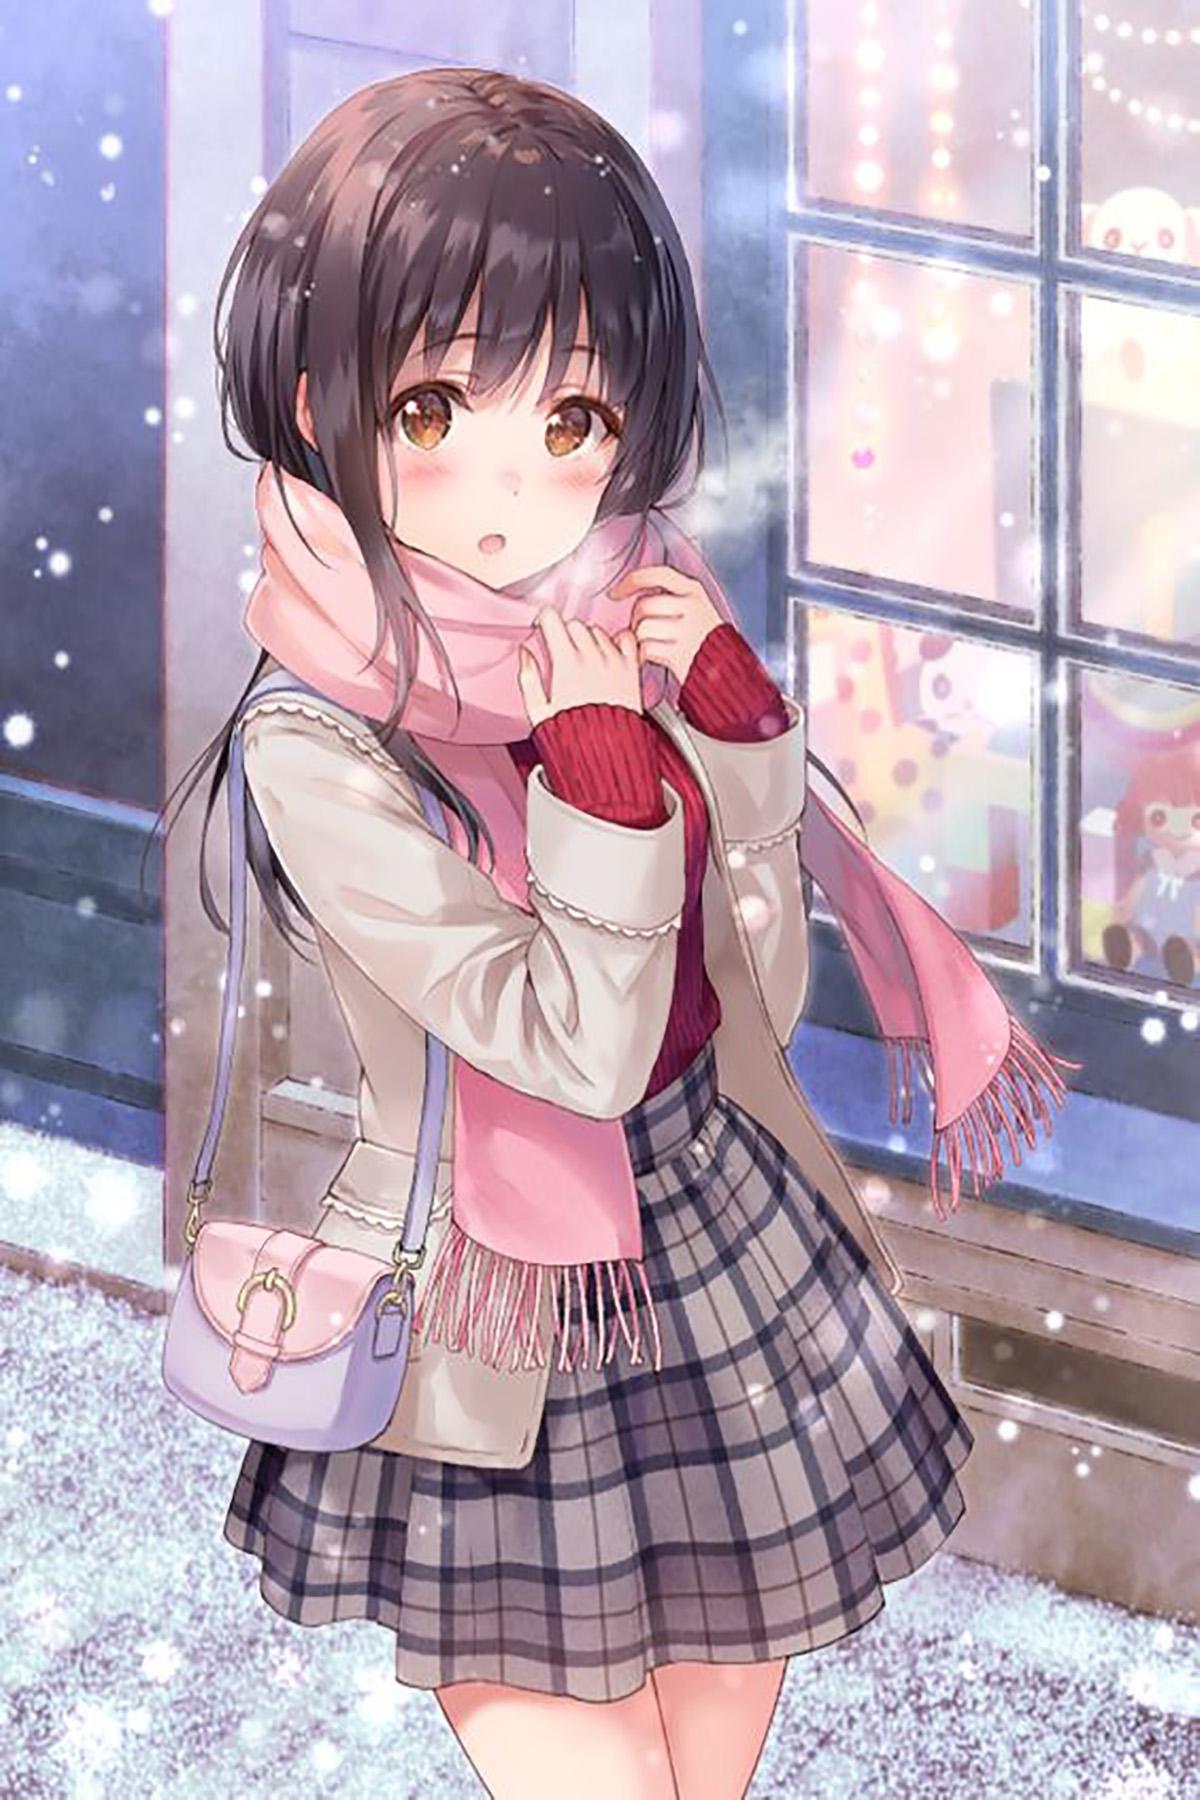 Anime Kawaii Wallpaper Wallpapers For Android Apk Download